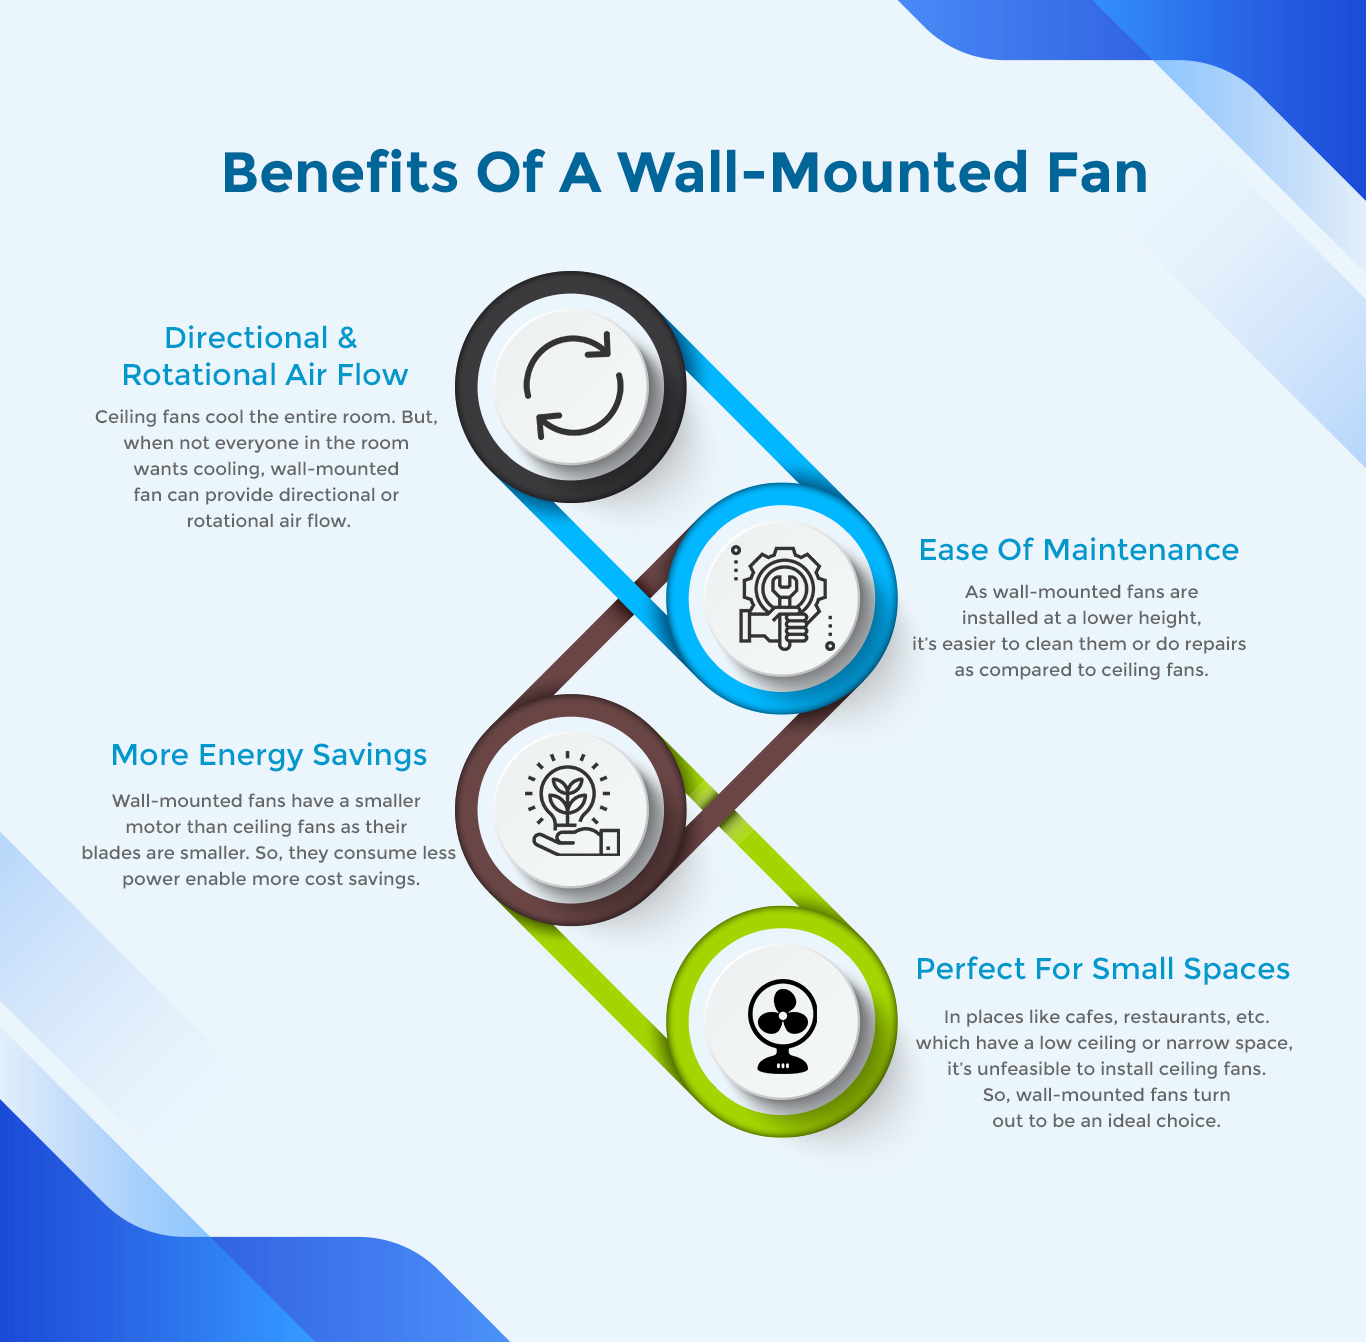 Benefits of wall mounted fans